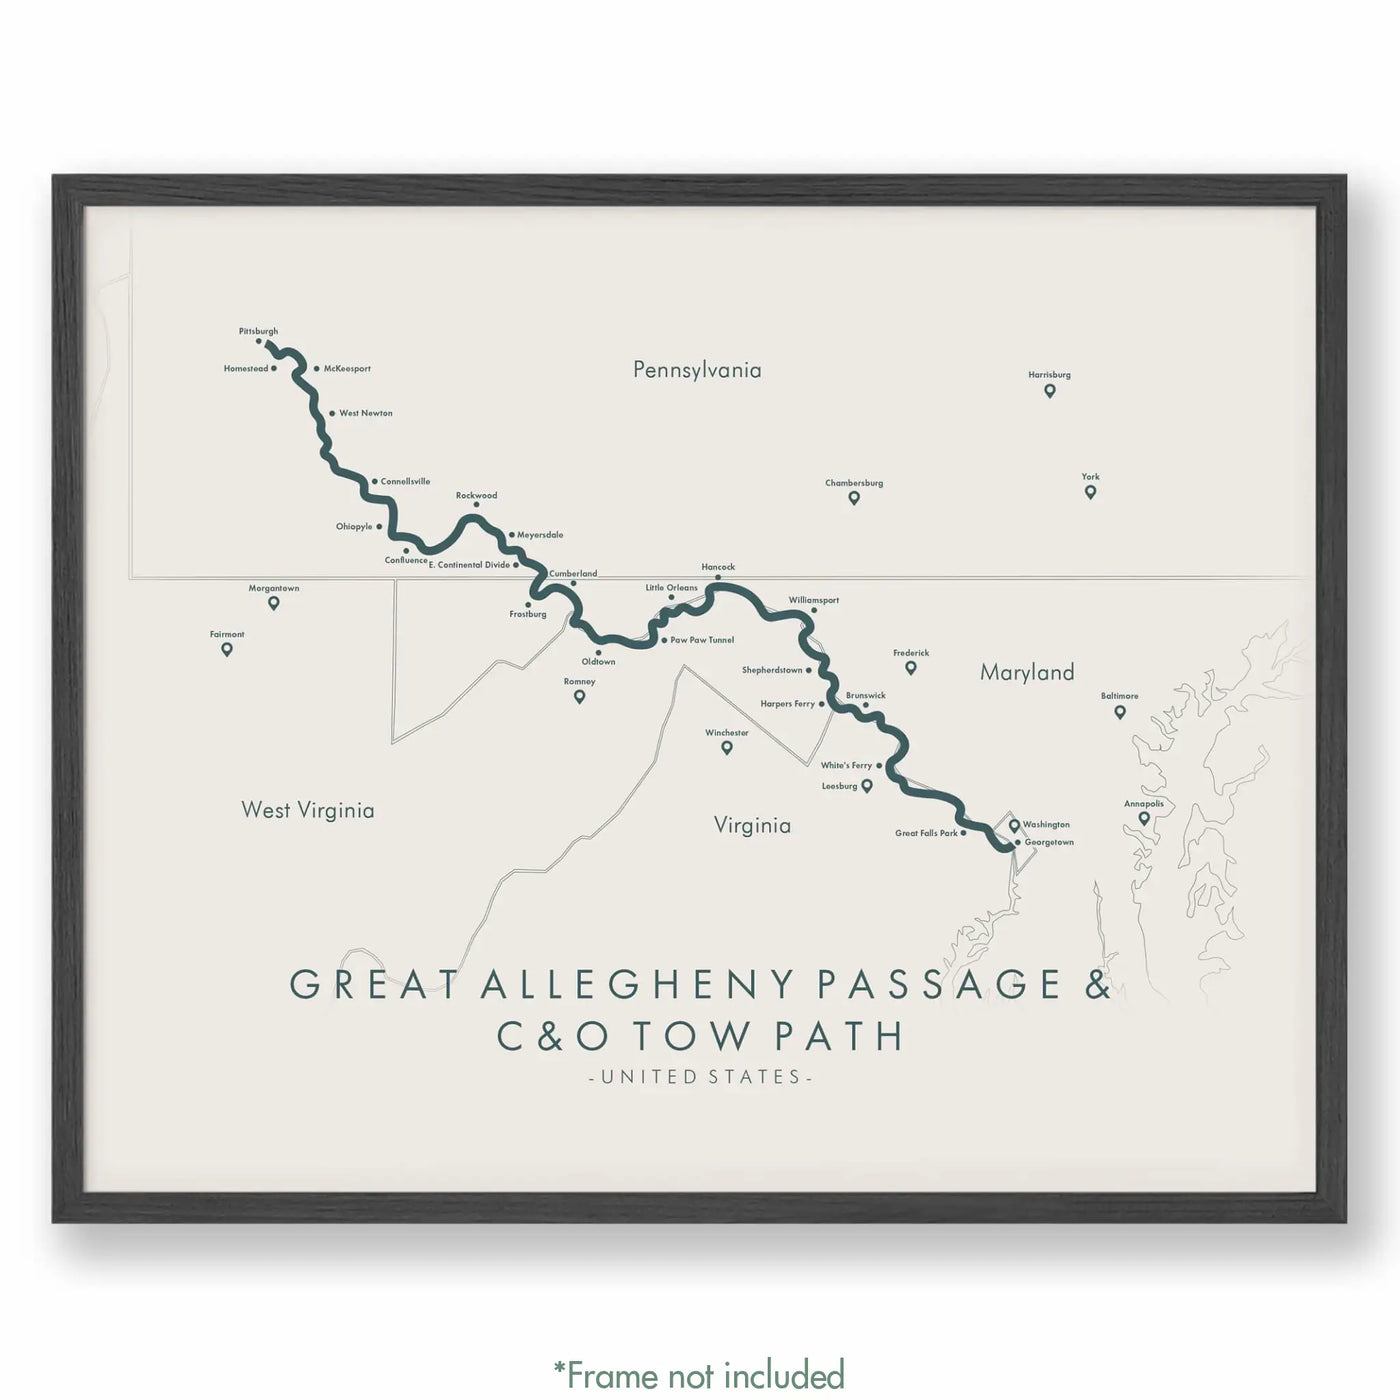 Trail Poster of Great Allegheny Passage & C&O Tow Path - Beige